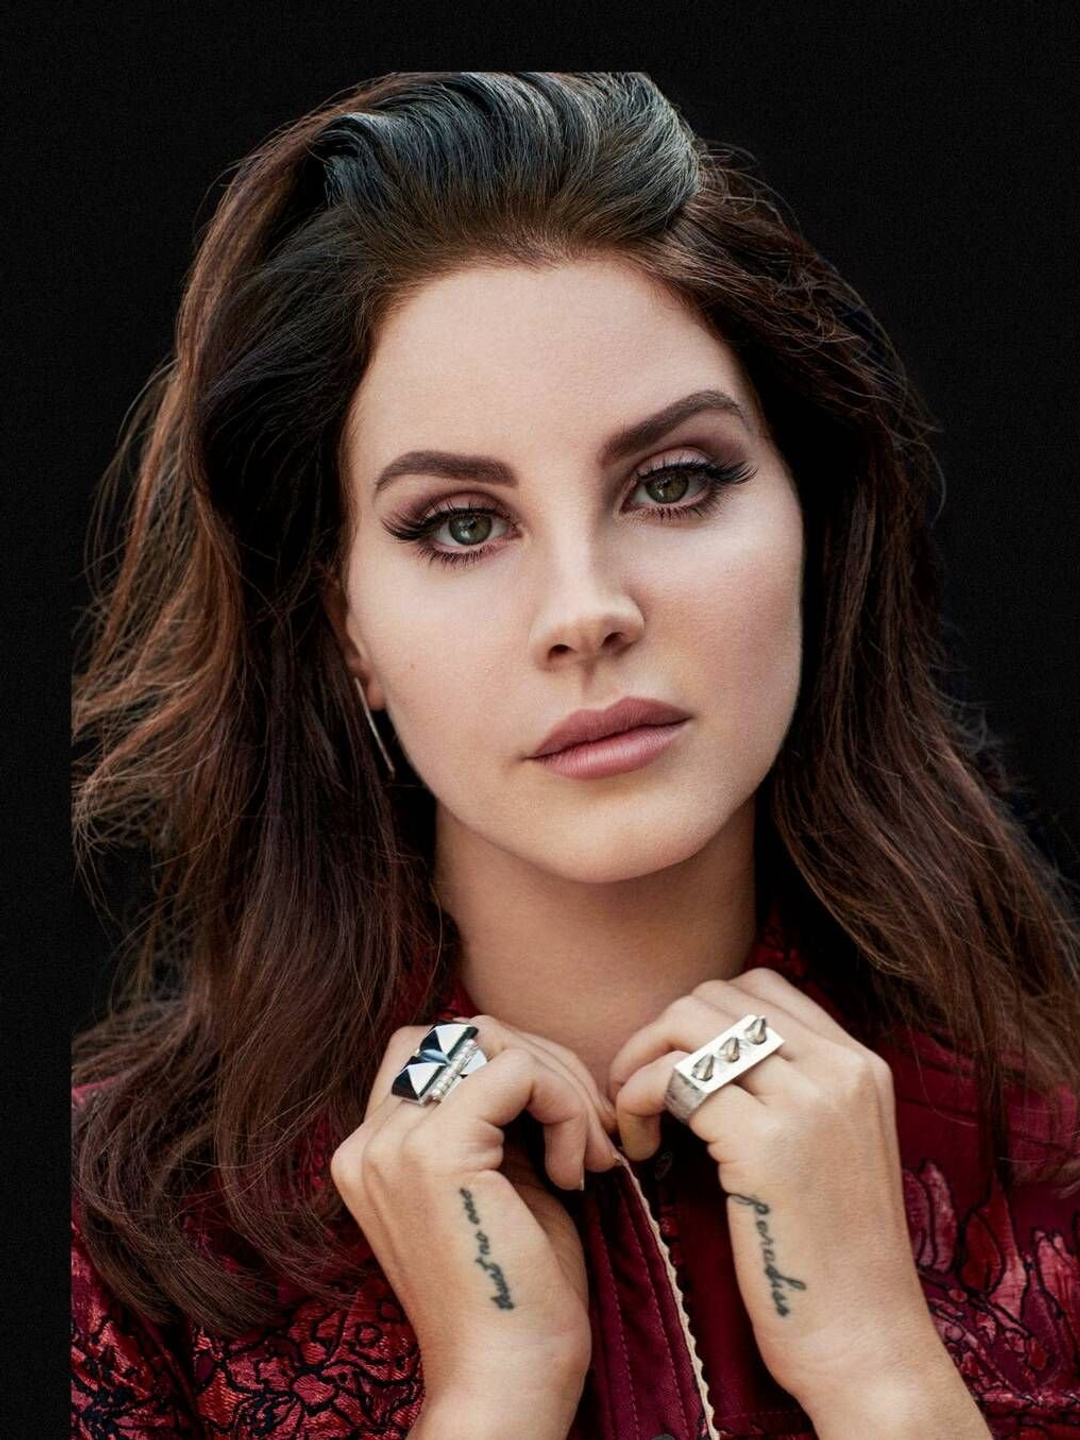 Lana Del Rey height and weight